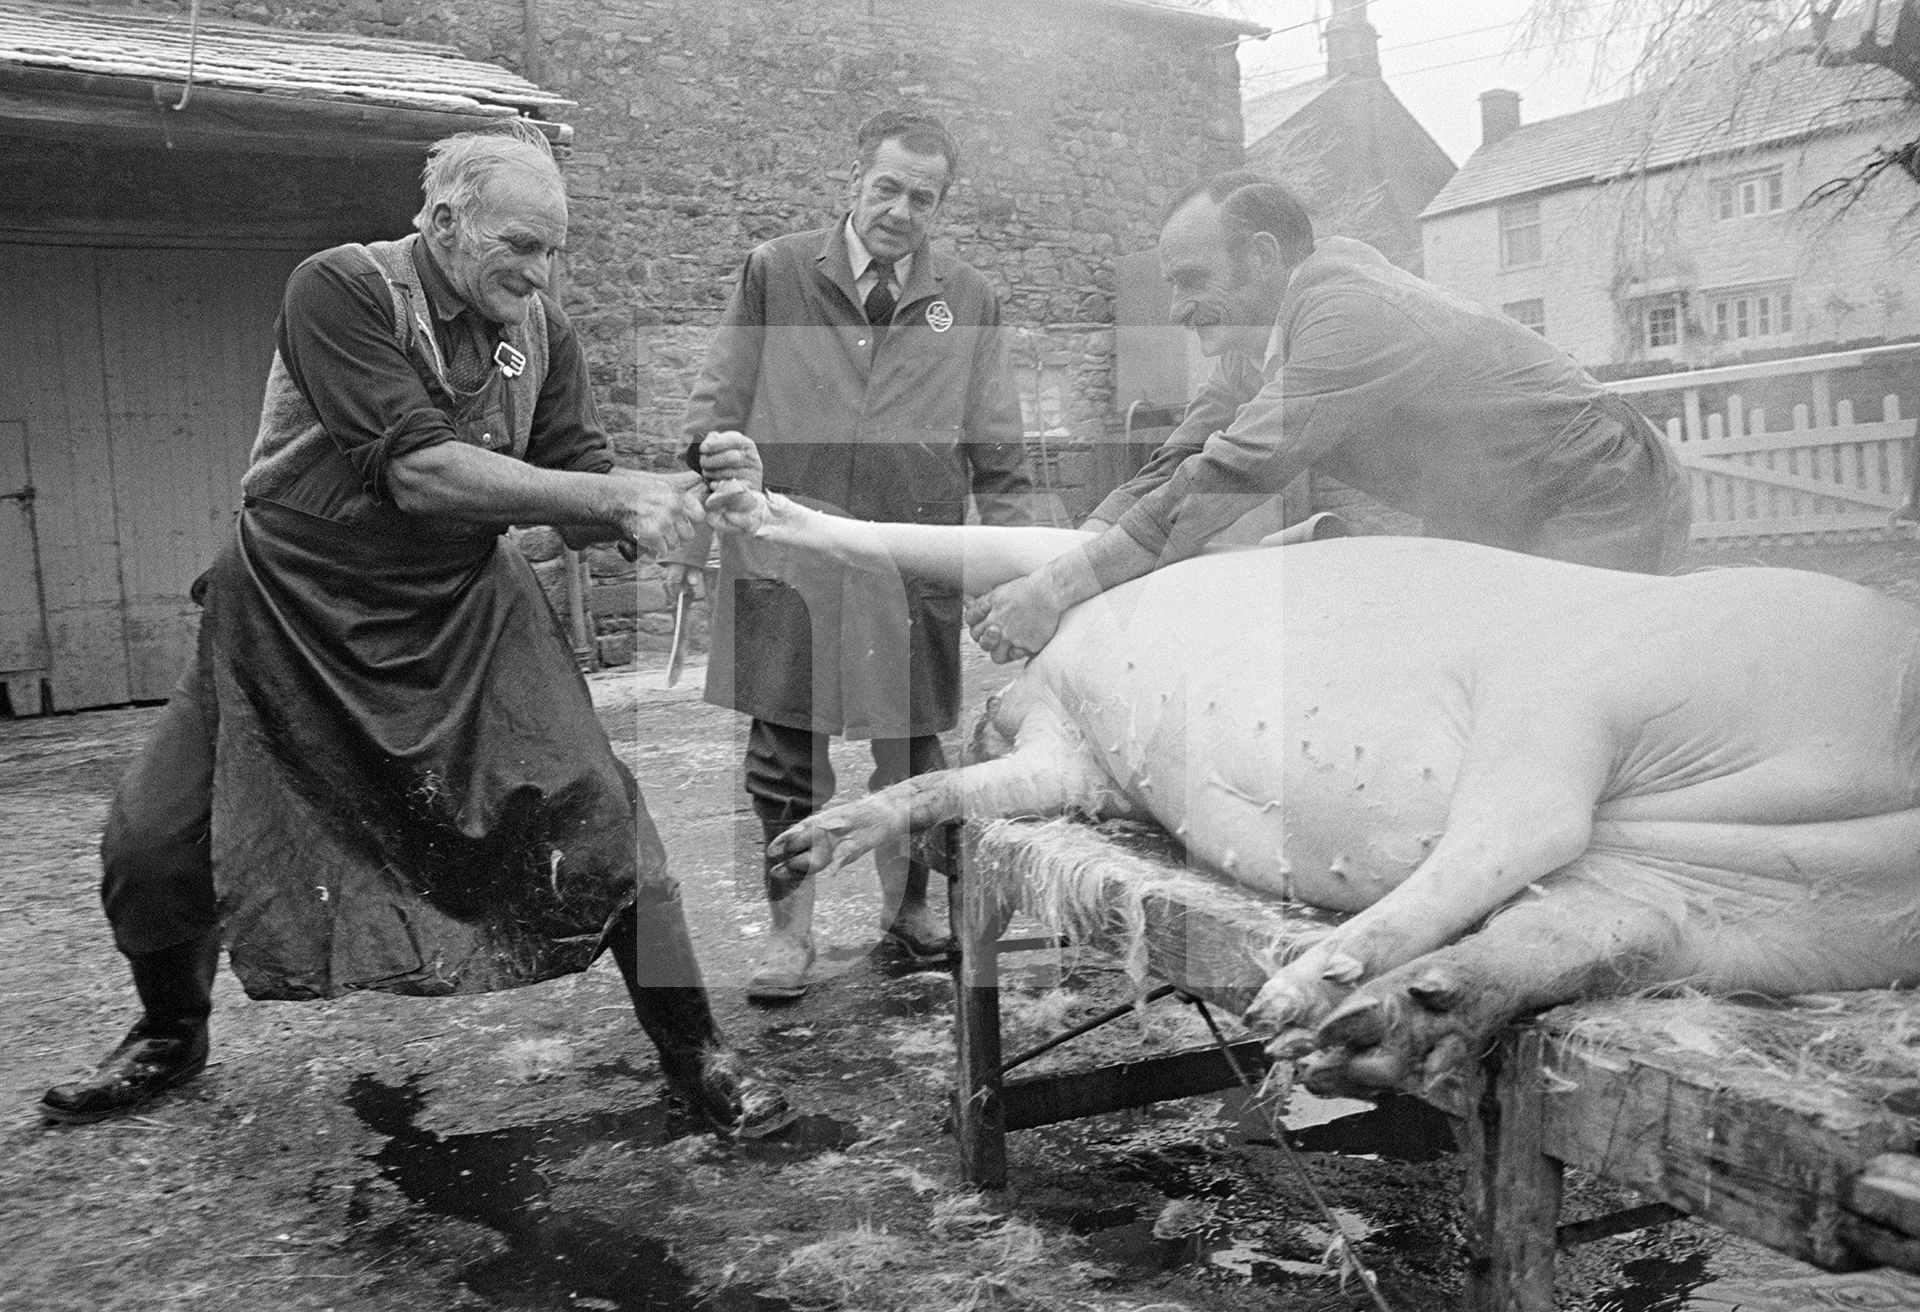 Butcher Everett Moore pulls off the cleers. North Yorkshire 1976 by Daniel Meadows